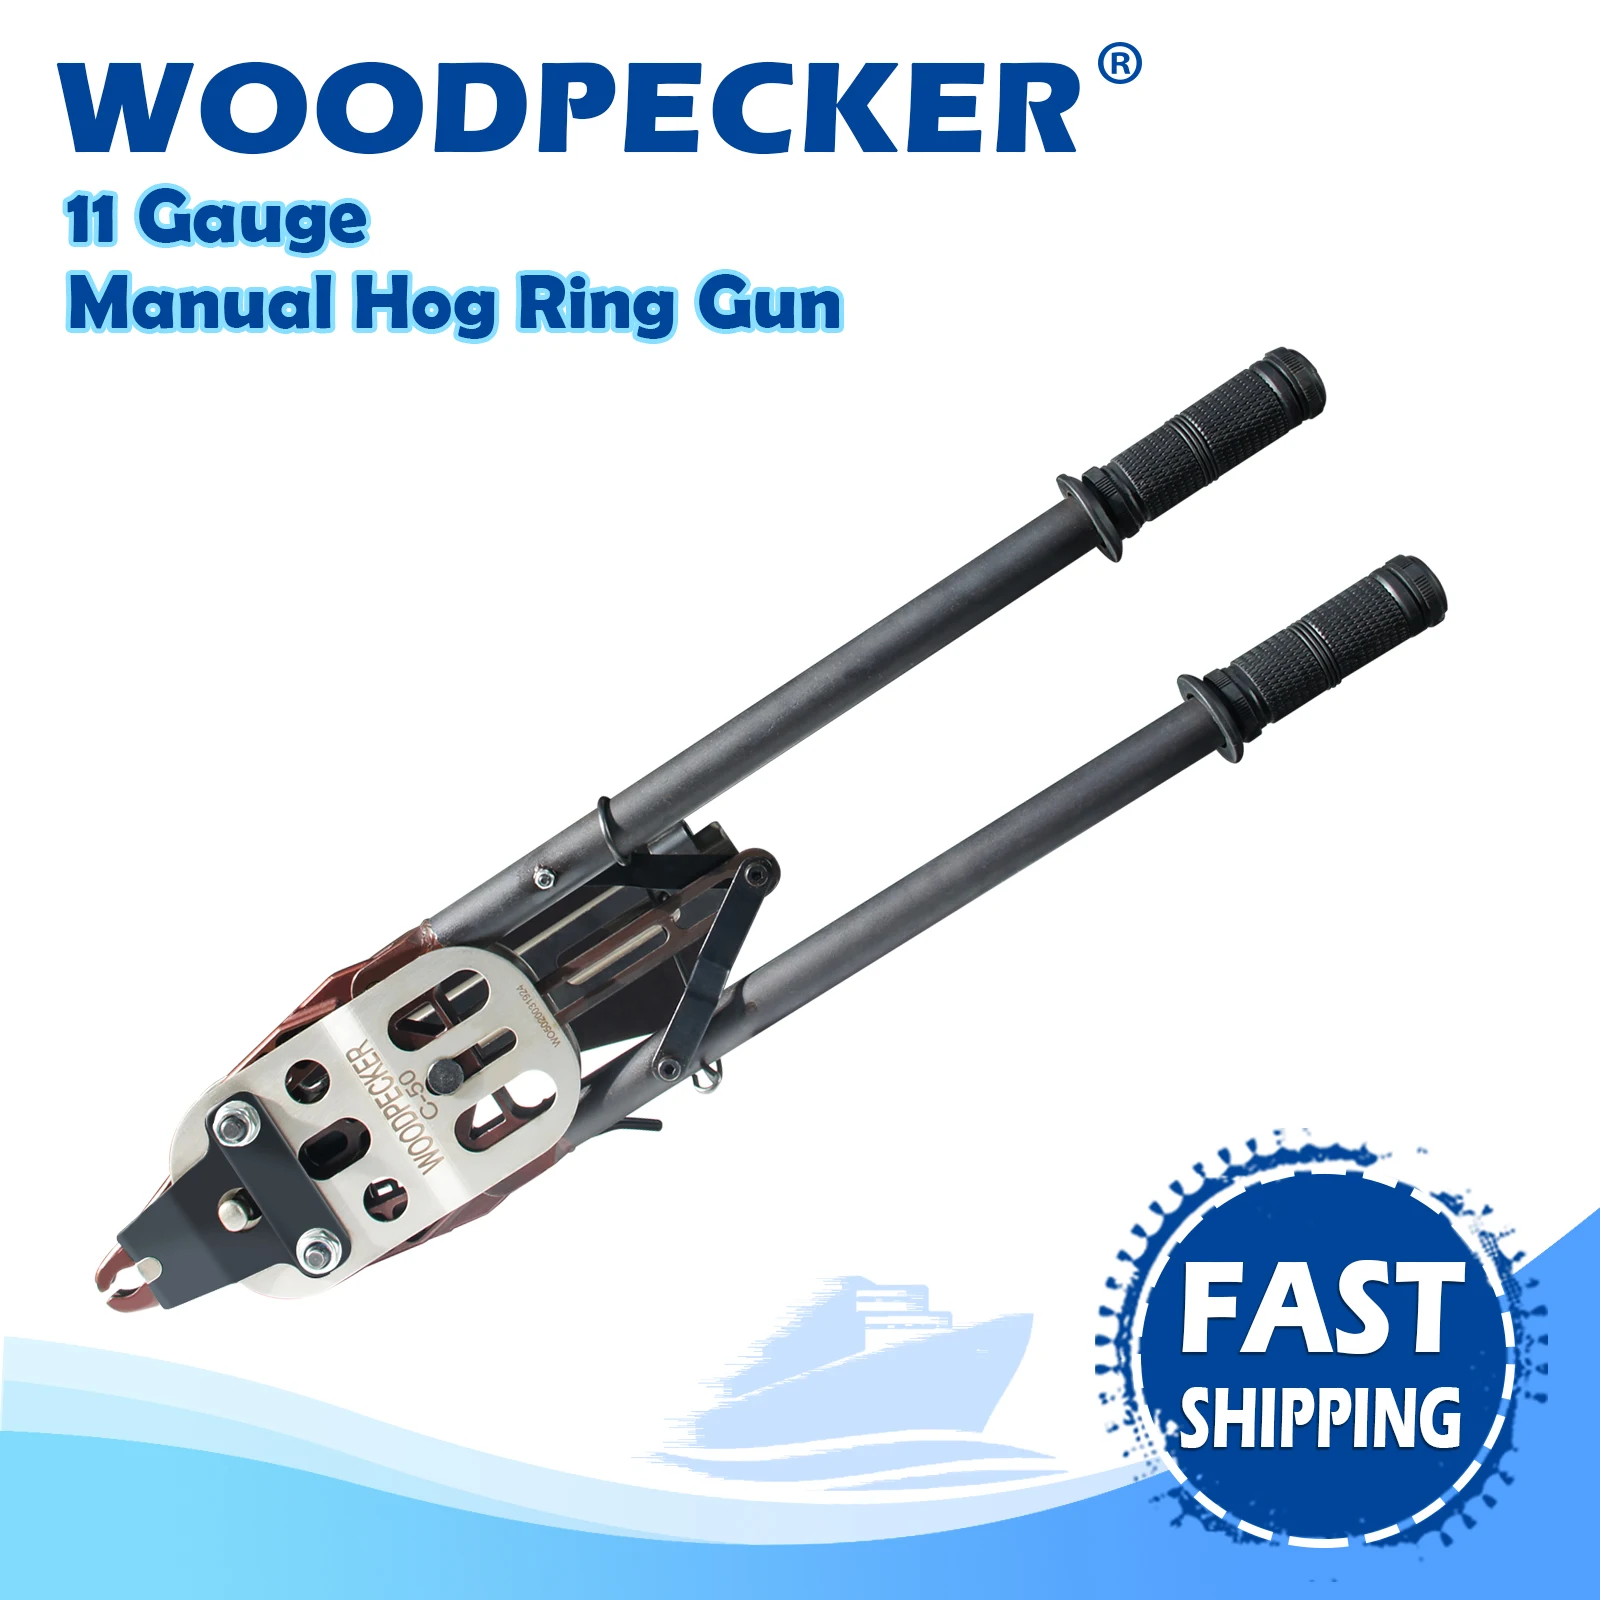 WOODPECKER C50 11 Gauge Heavy-Duty Manual Hog Ring Gun, Snap-Ring Plier with Auto-feed System, 45mm Crown for Wire Cages,Fencing 6 gauge amp kit amplifier install flexible wiring suitable for car audio system modification durable car audio wire wiring kit